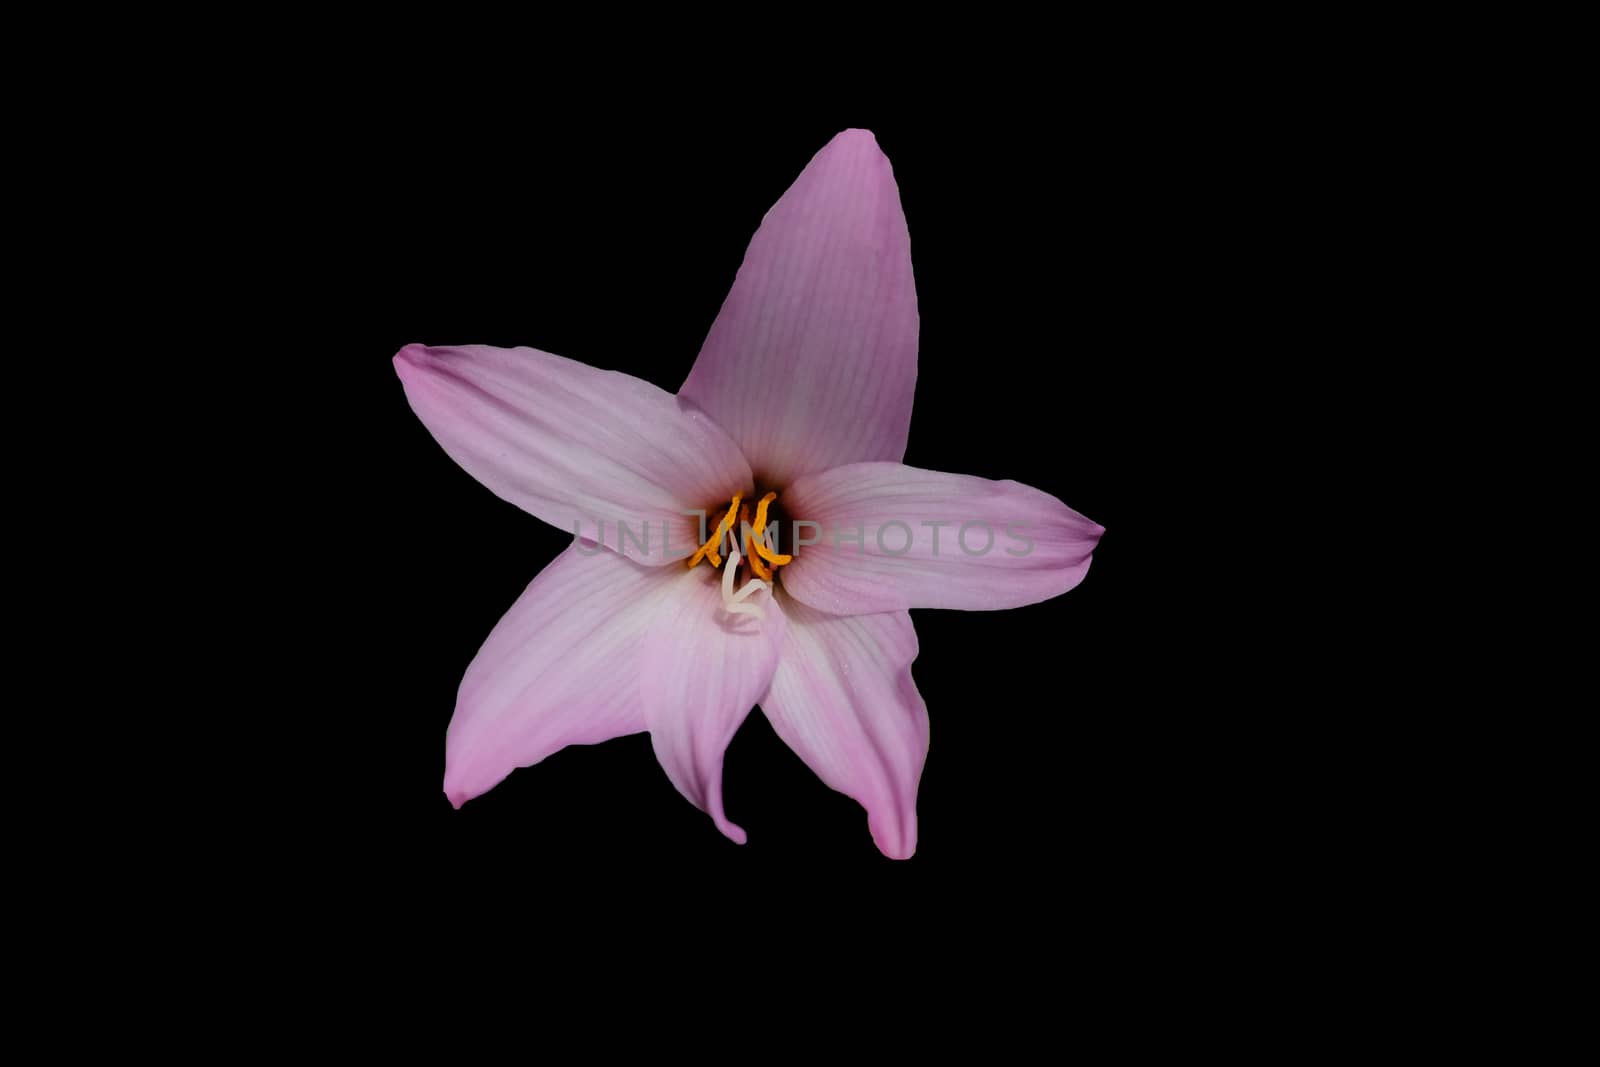 Closeup head shot of pink easter lily flower isolated on black background by Macrostud